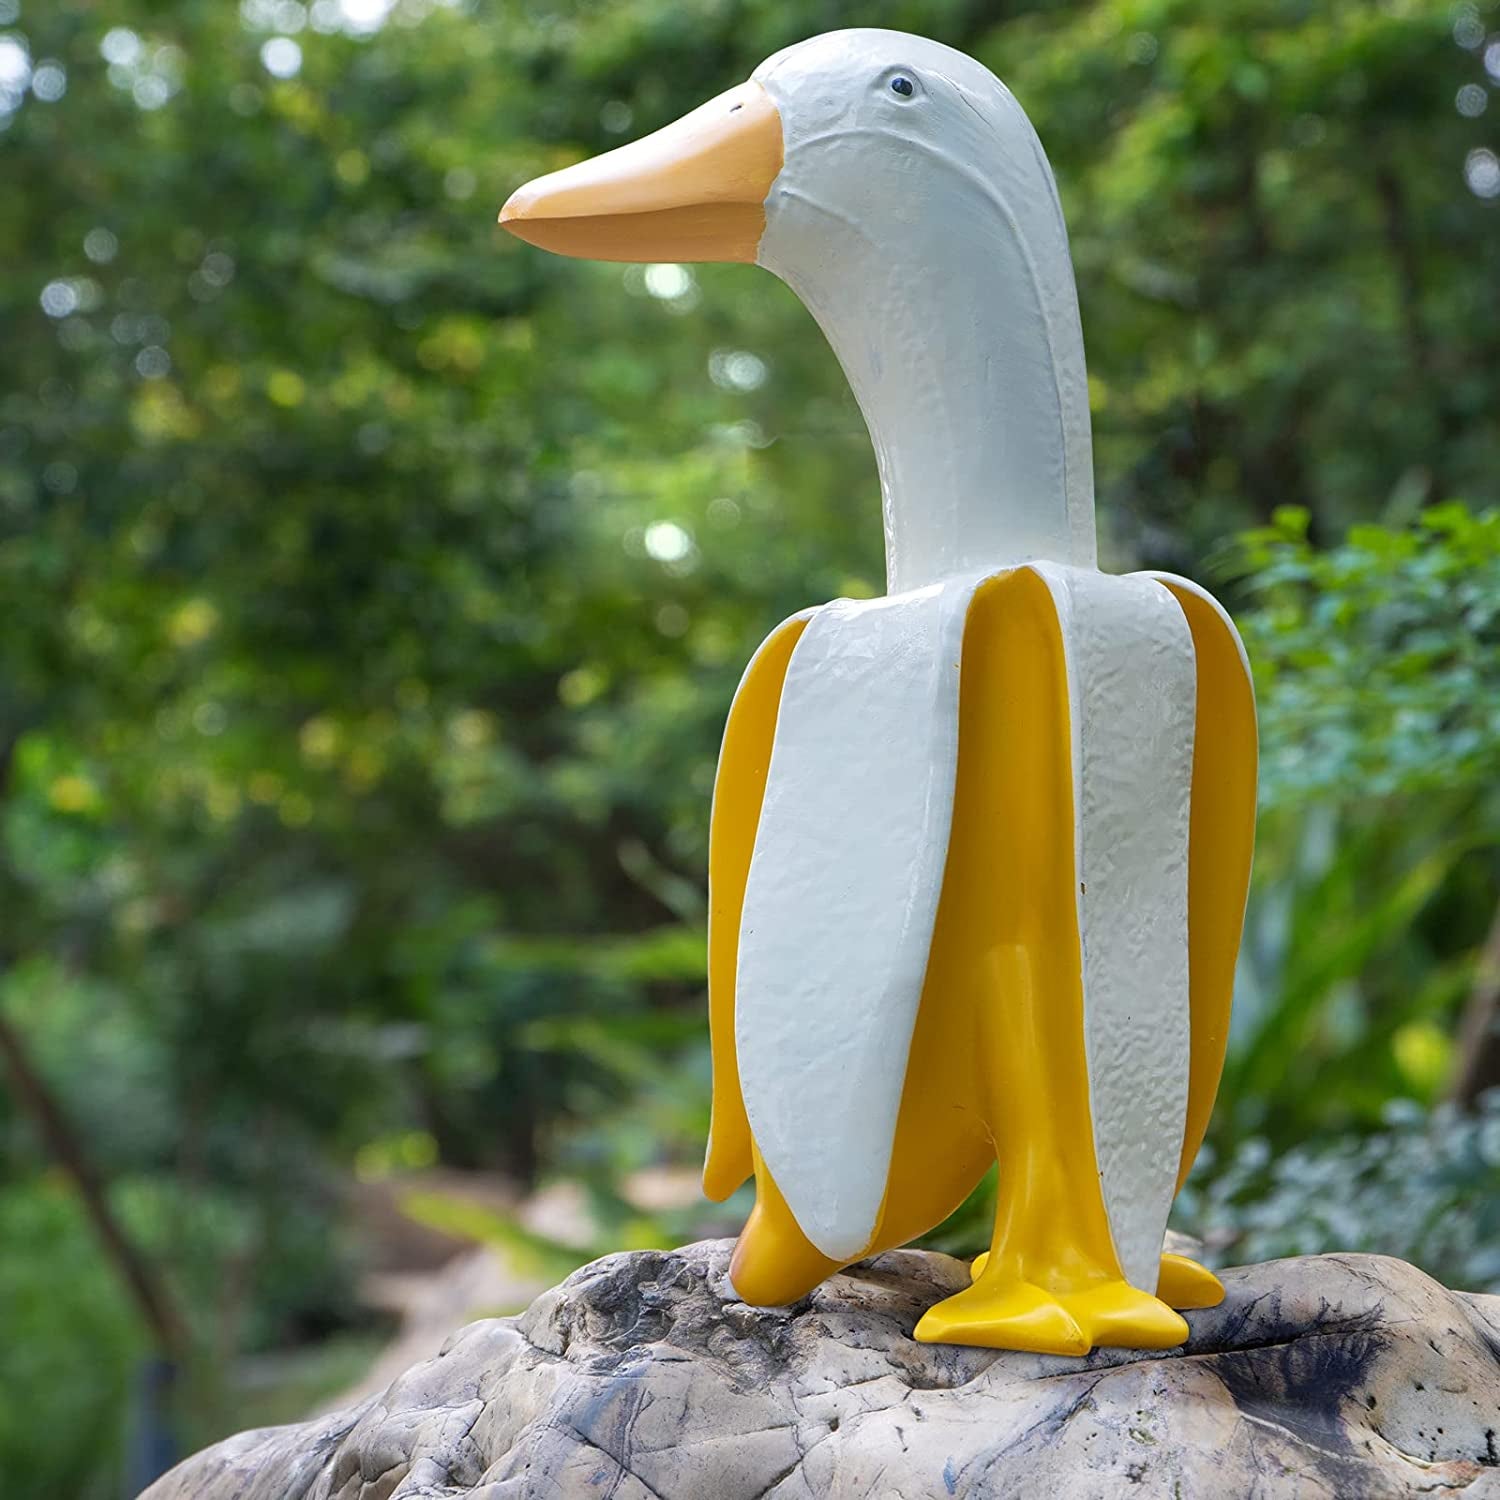 Lhocm, Lhocm Funny Large Banana Duck Garden Statues Decoration, Creative Duck Gnomes Garden Art for Outdoor Fall Winter Garden Decor, Outdoor Statue for Patio, Lawn, Yard Decoration, Cute Housewarming Gifts